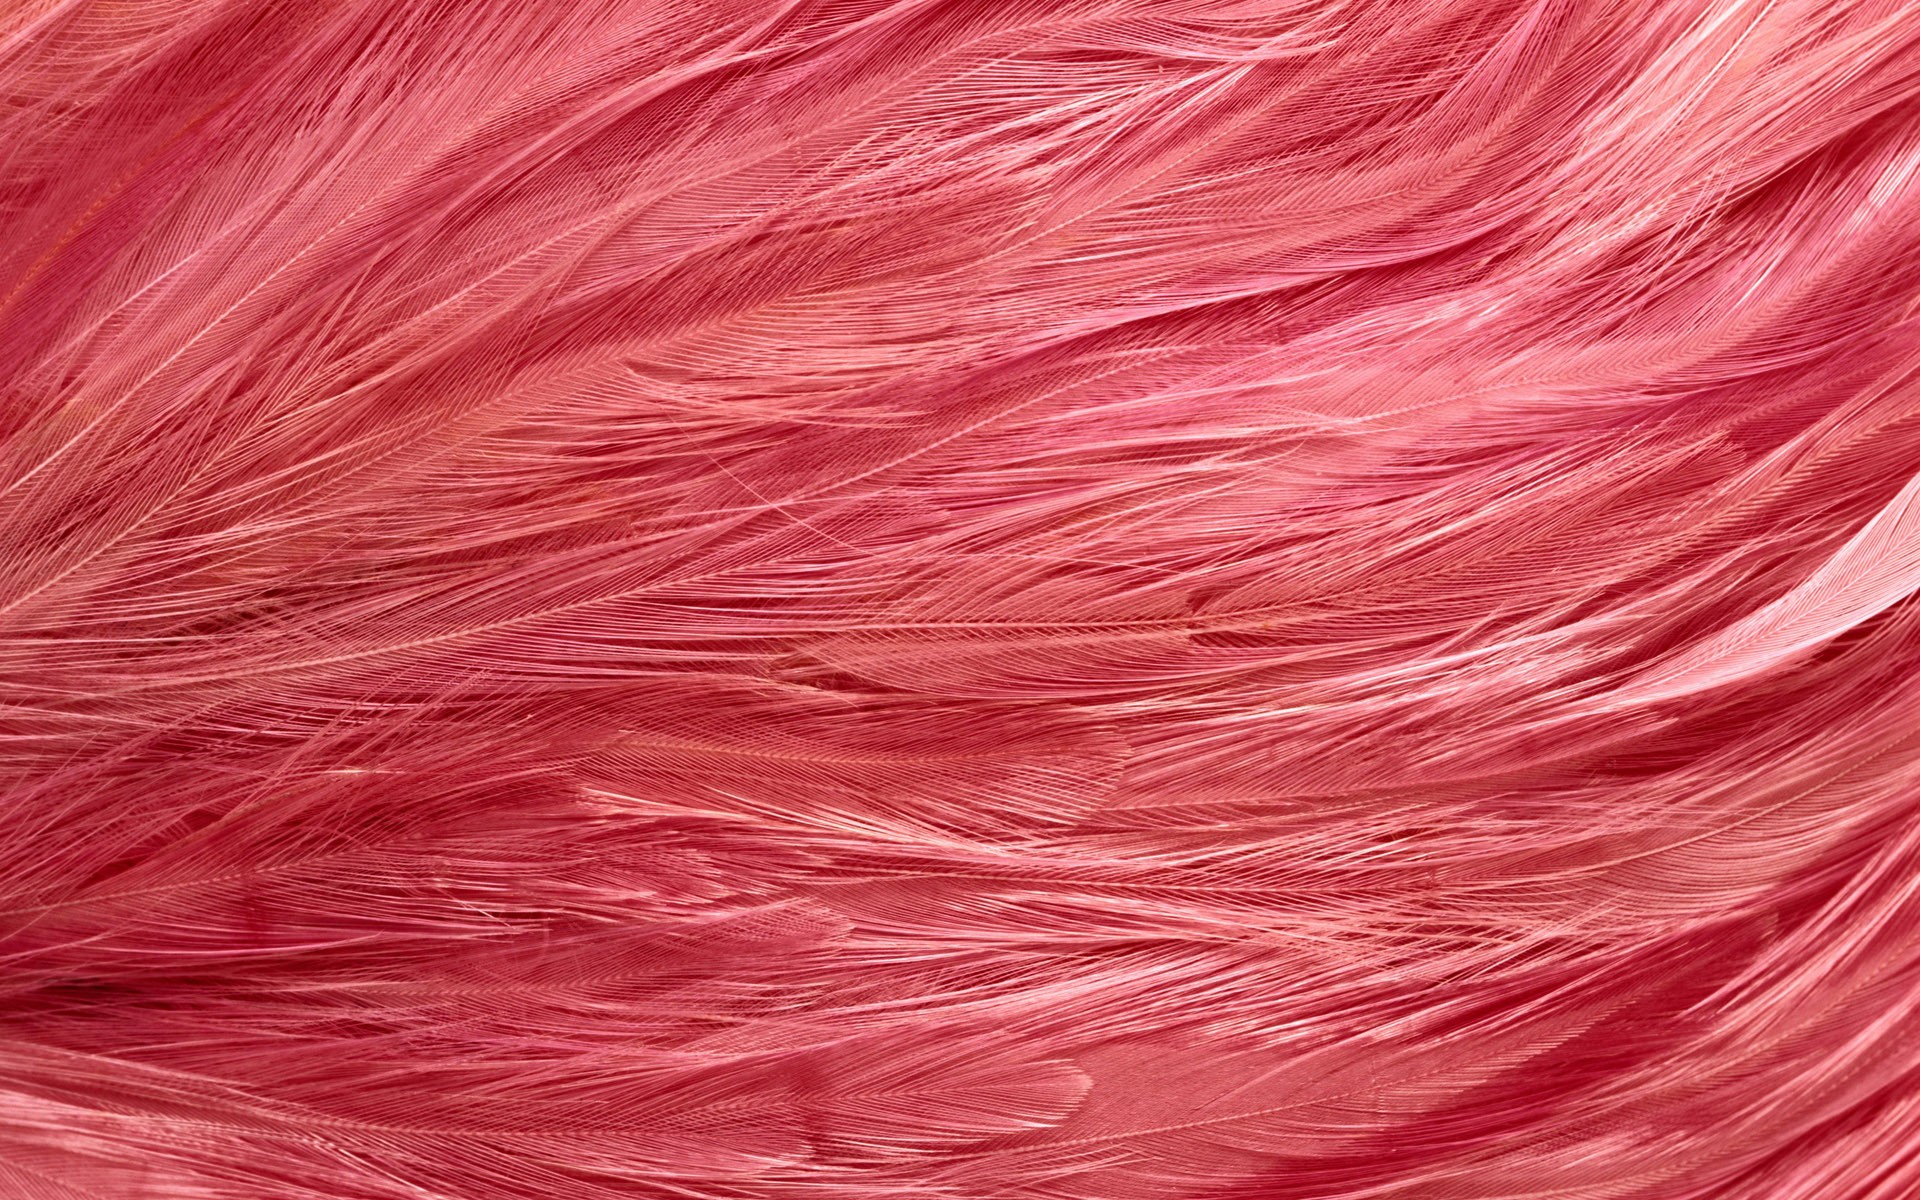 The Pink Feathers Wallpaper iPhone